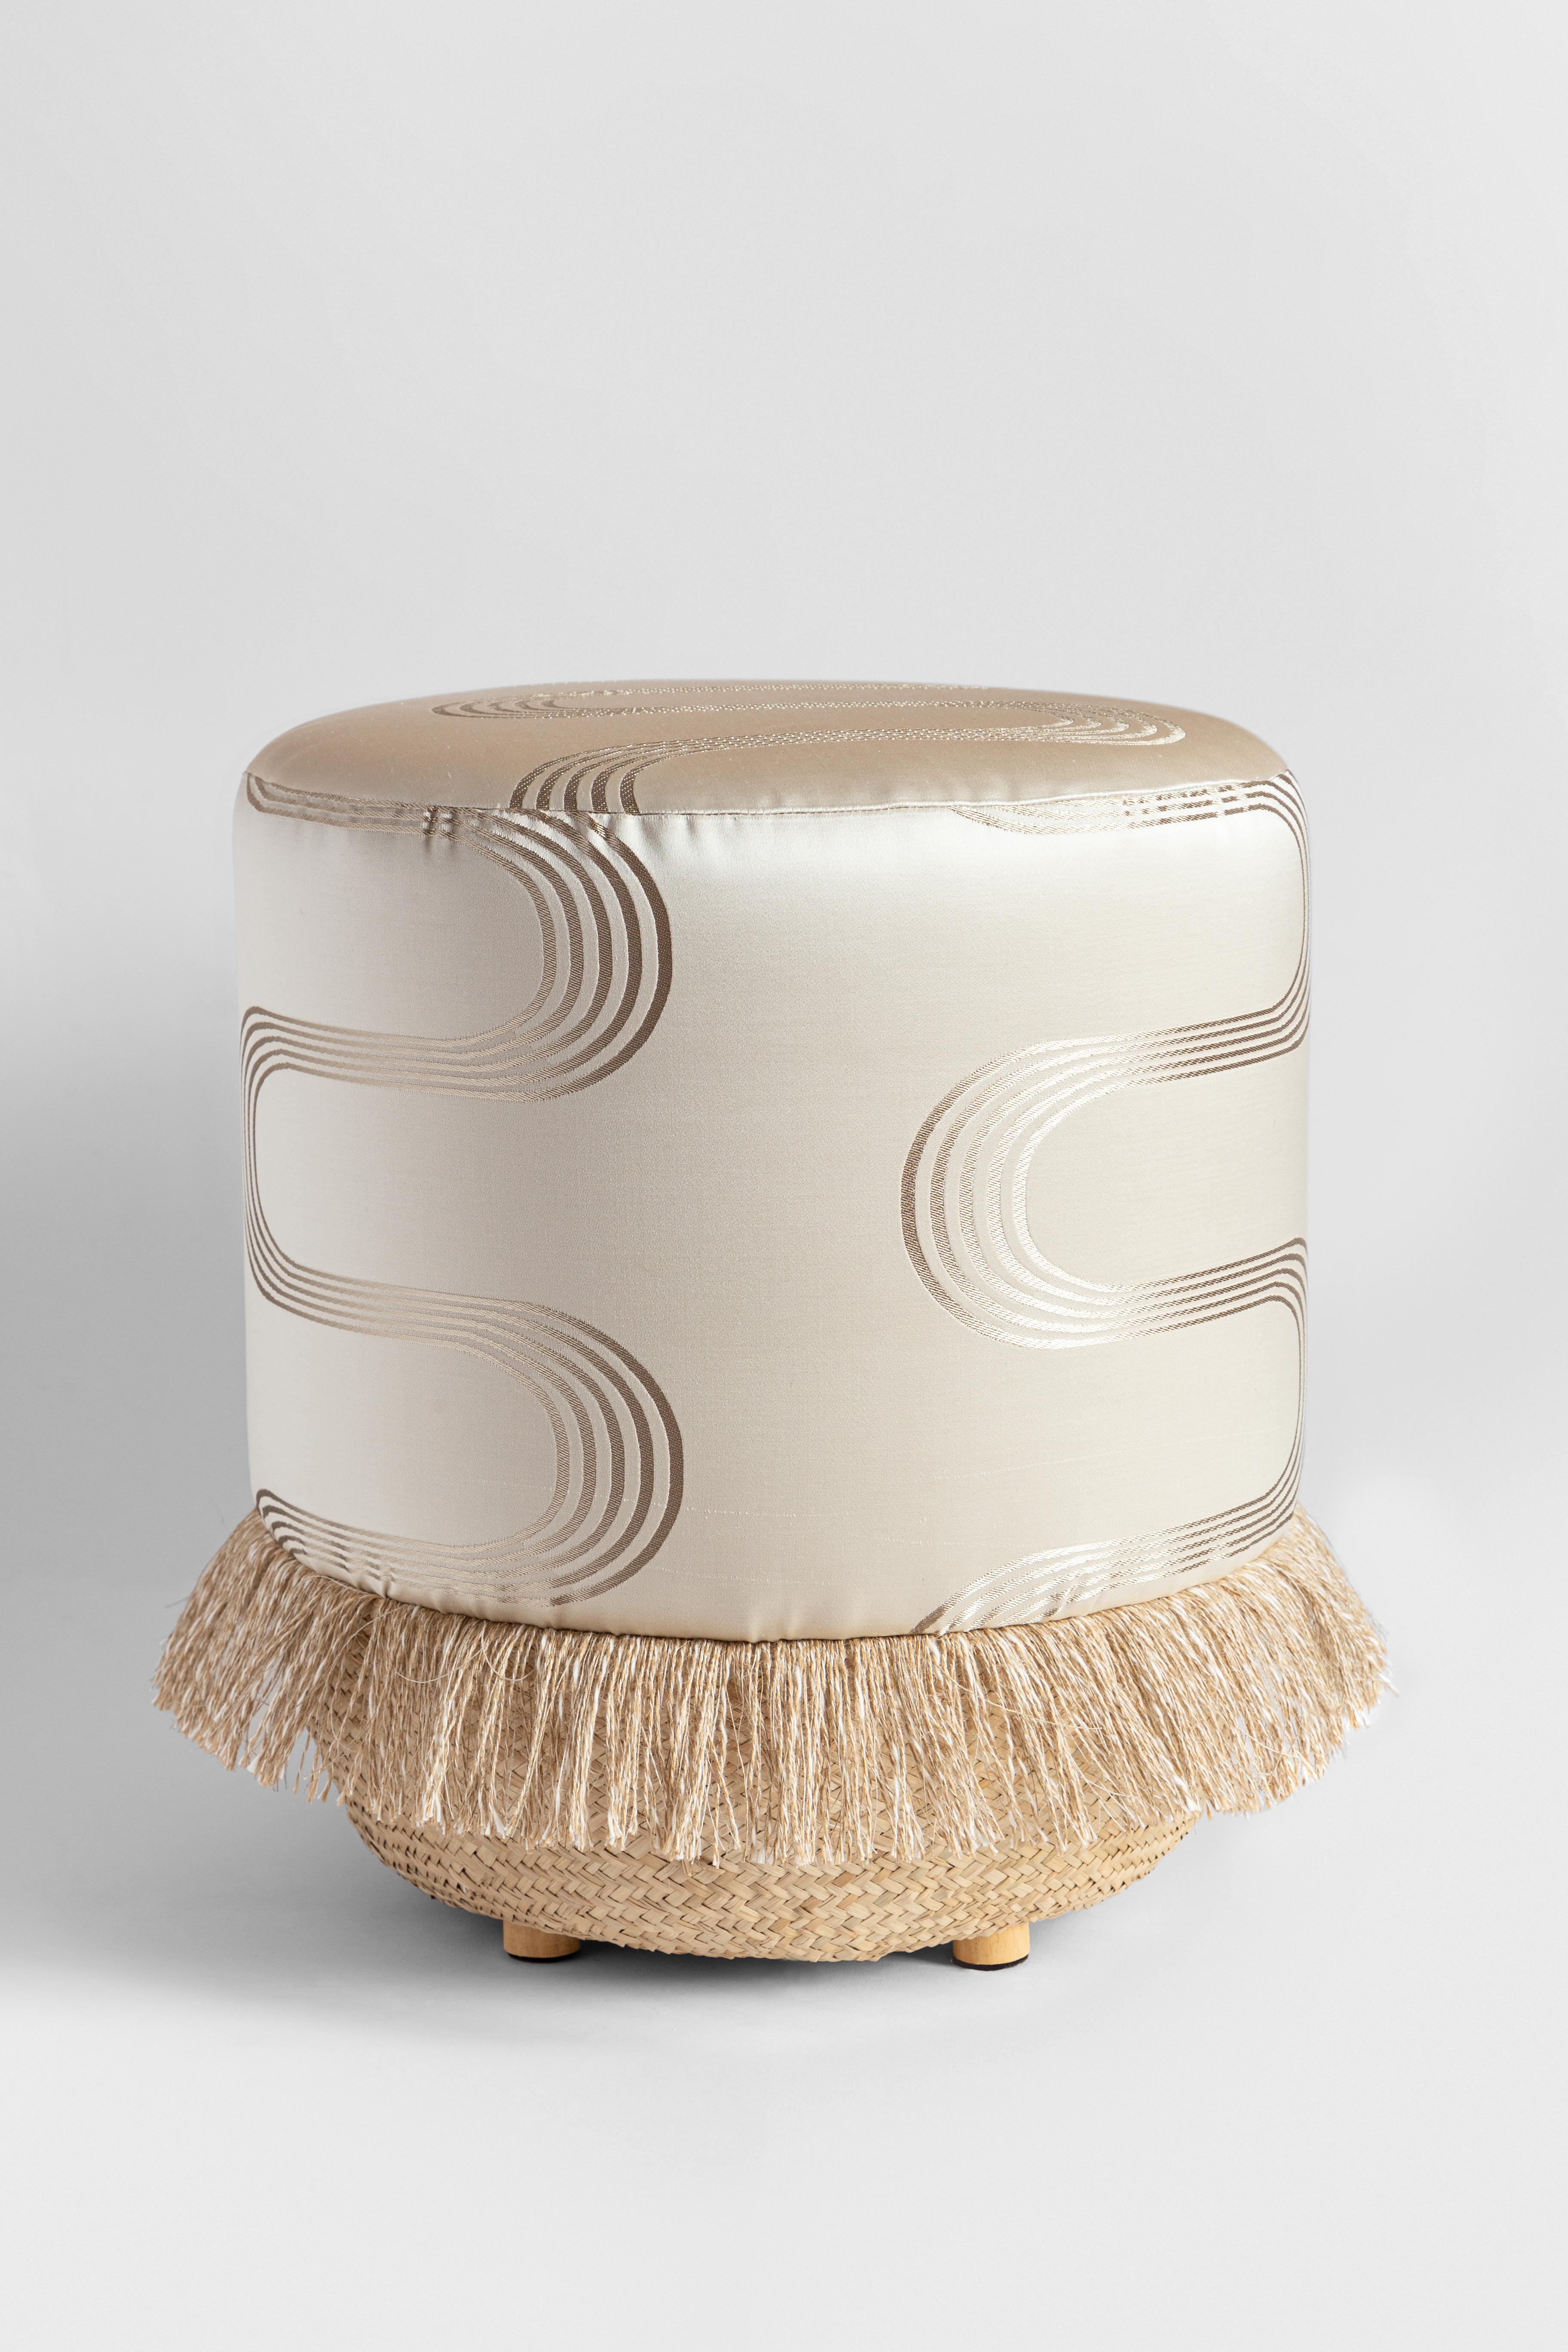 This ivory pouf is the epitome of refined taste and classy designs. Its light silk brightens up the room and would fit well both in a dark and bright interior. The curved shapes together with the cotton fringes which characterize the bottom are the